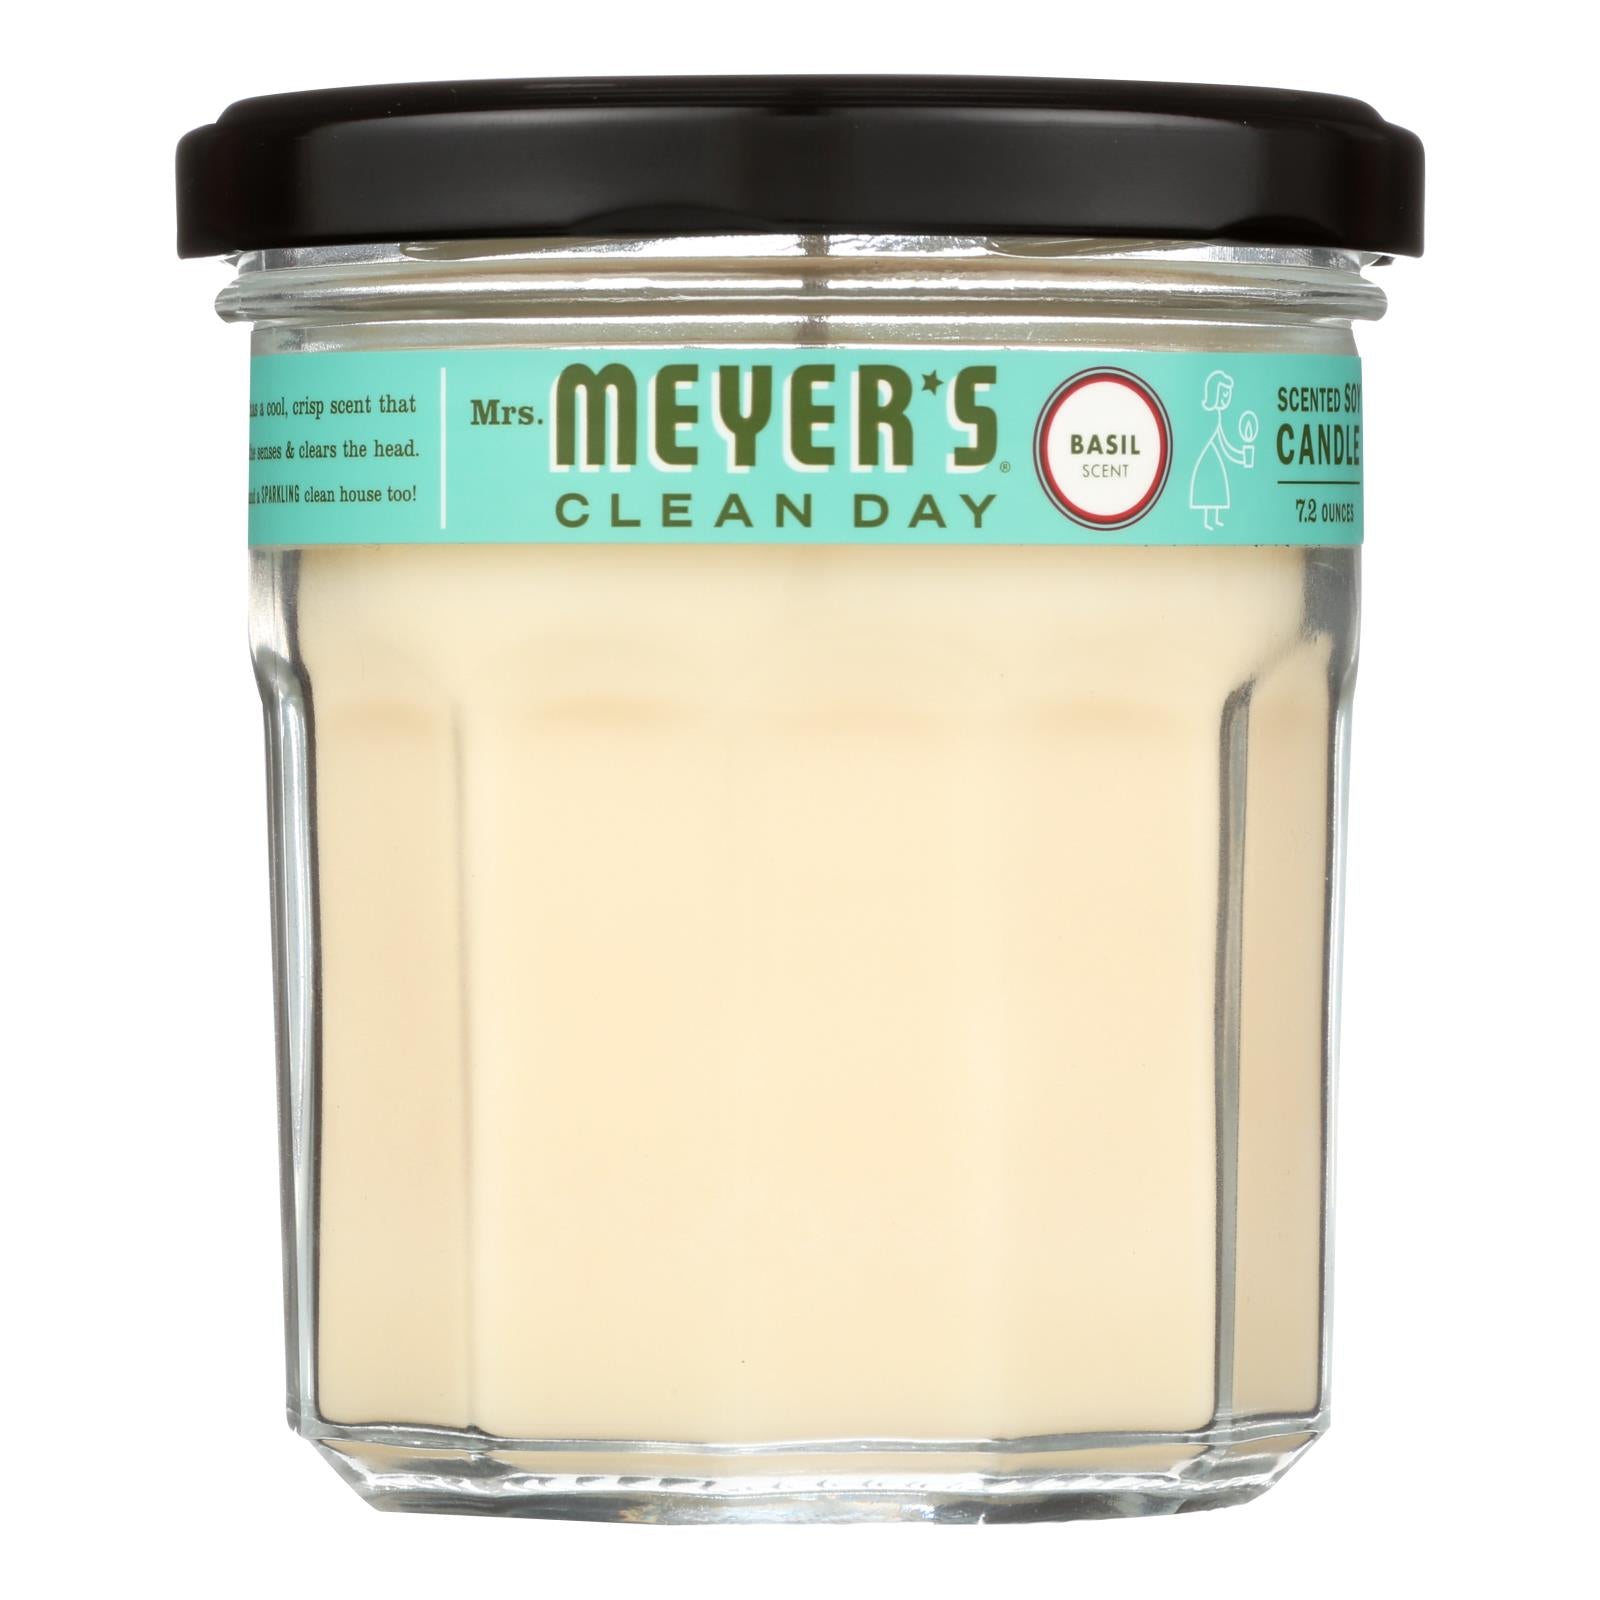 Mrs. Meyer's Clean Day - Soy Candle - Basil - 7.2 Oz - Case Of 6